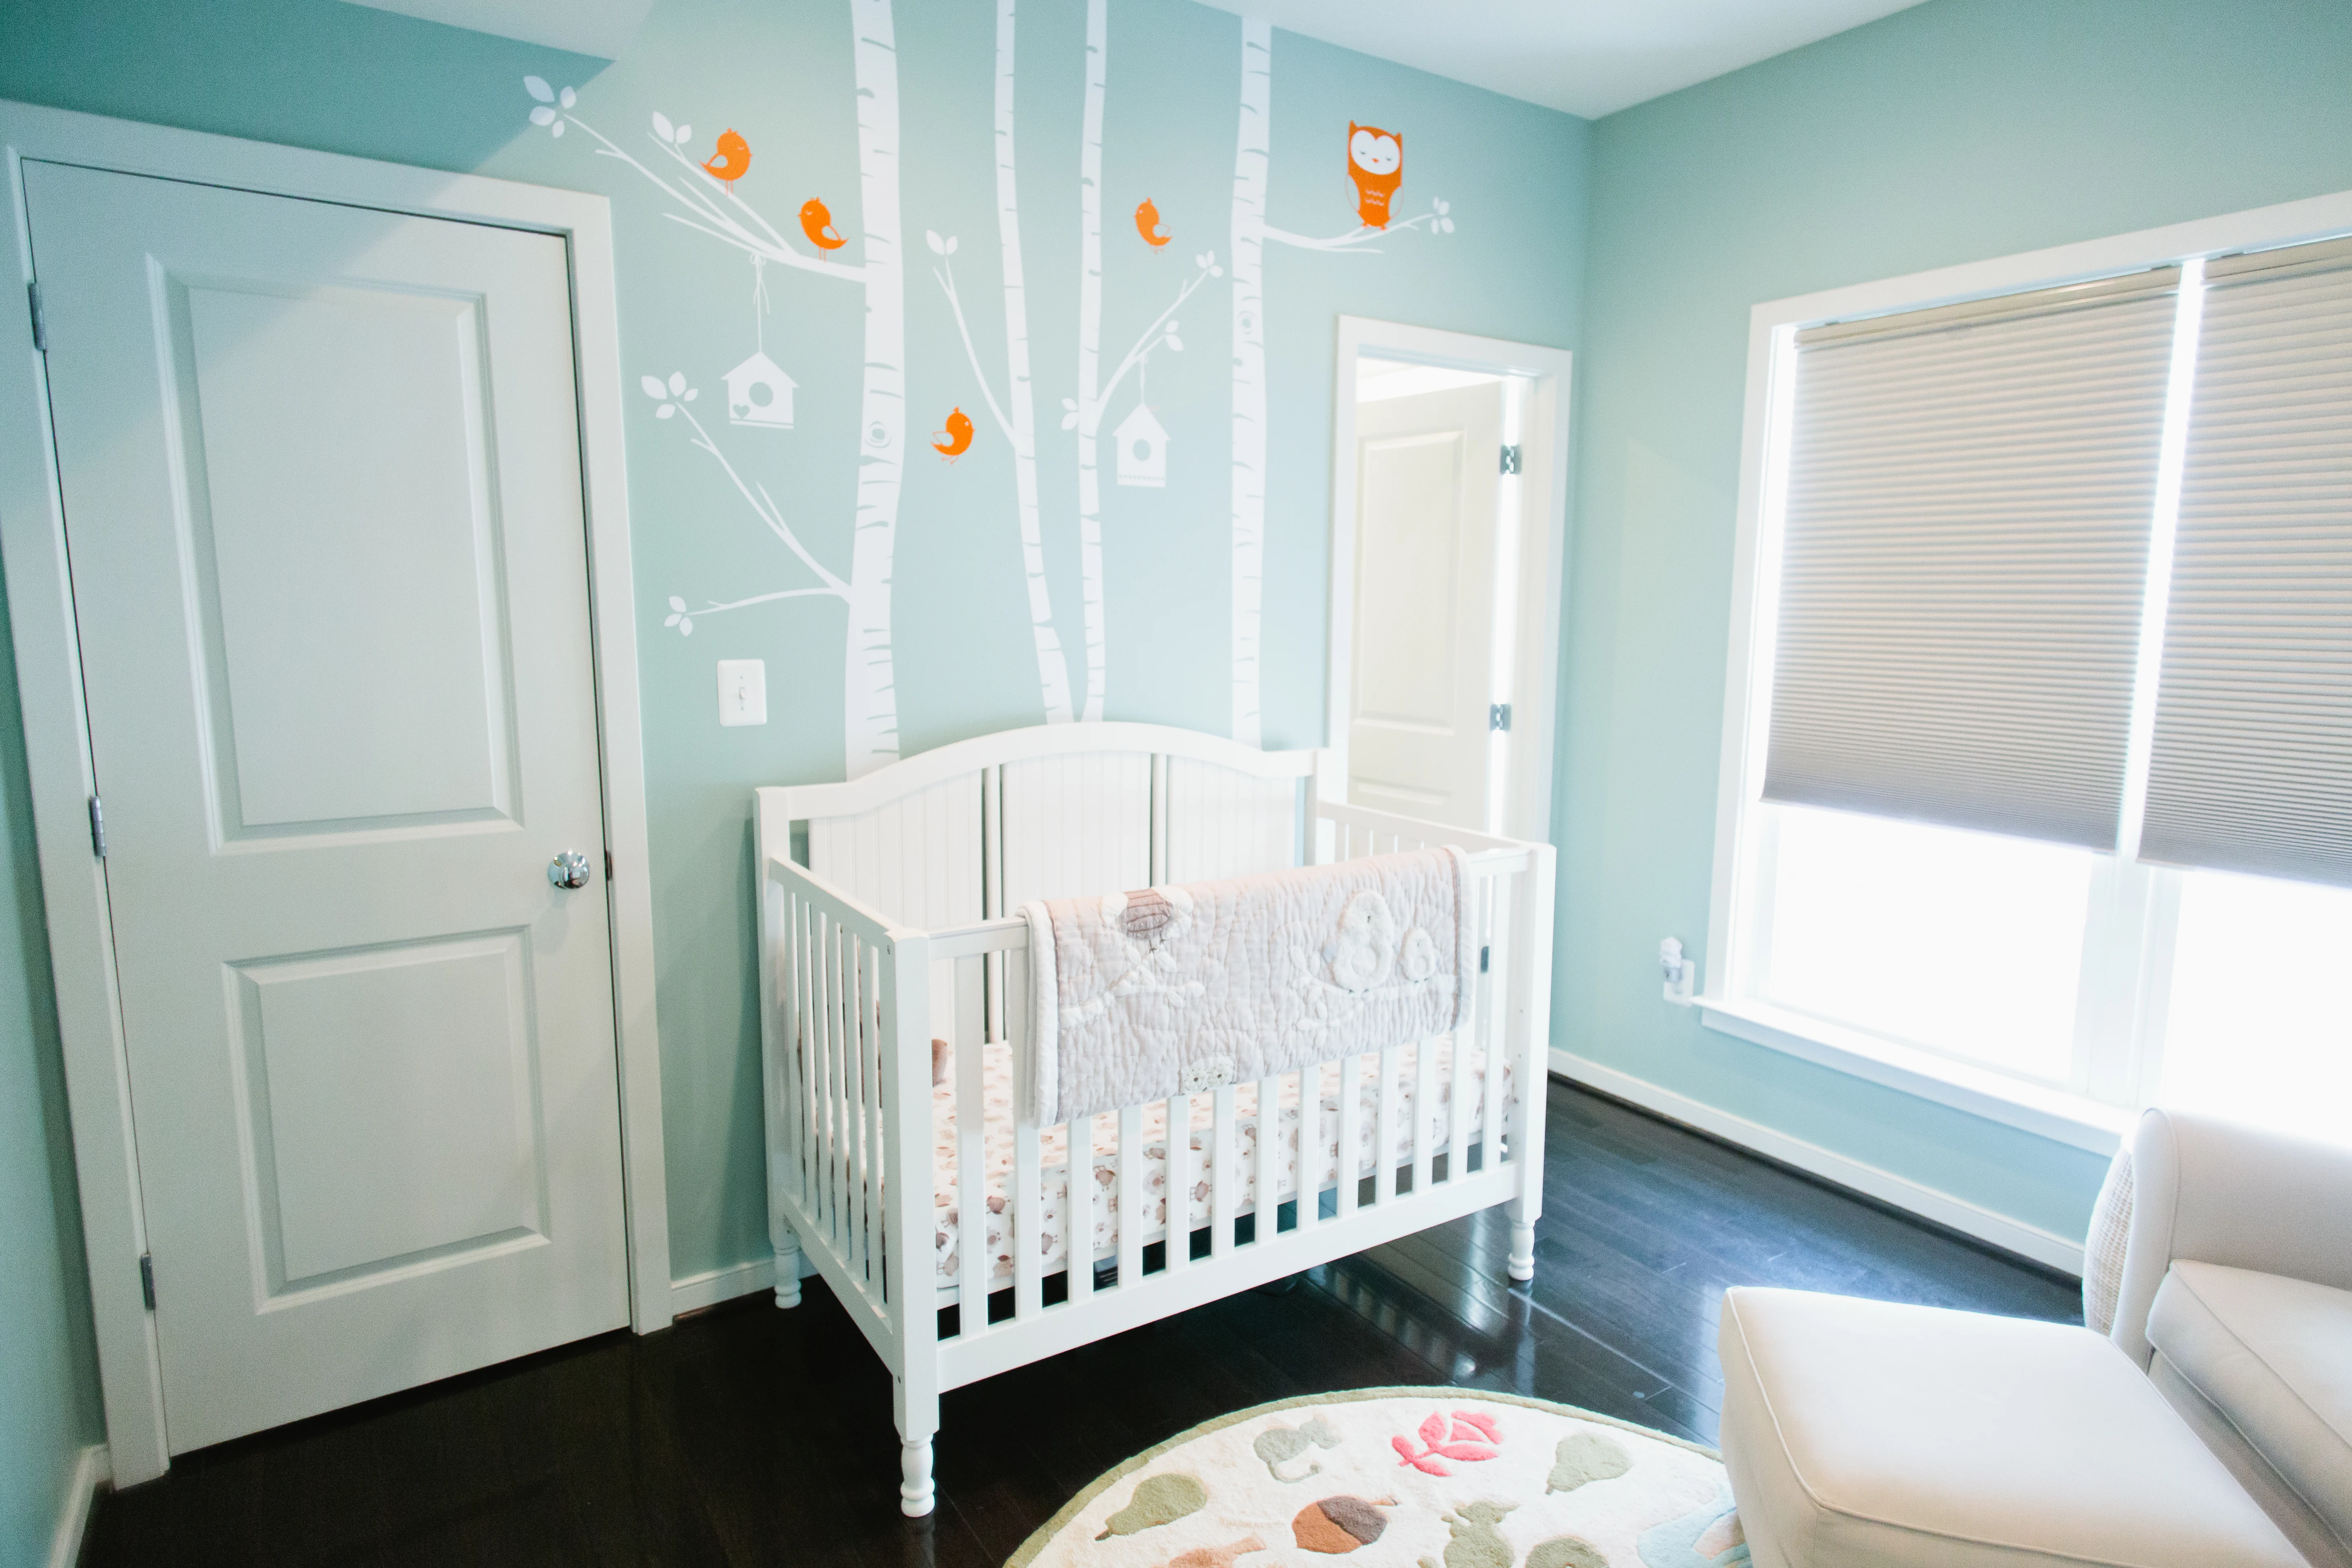 Blue Owl Nursery with Birch Tree and Owl Wall Decals